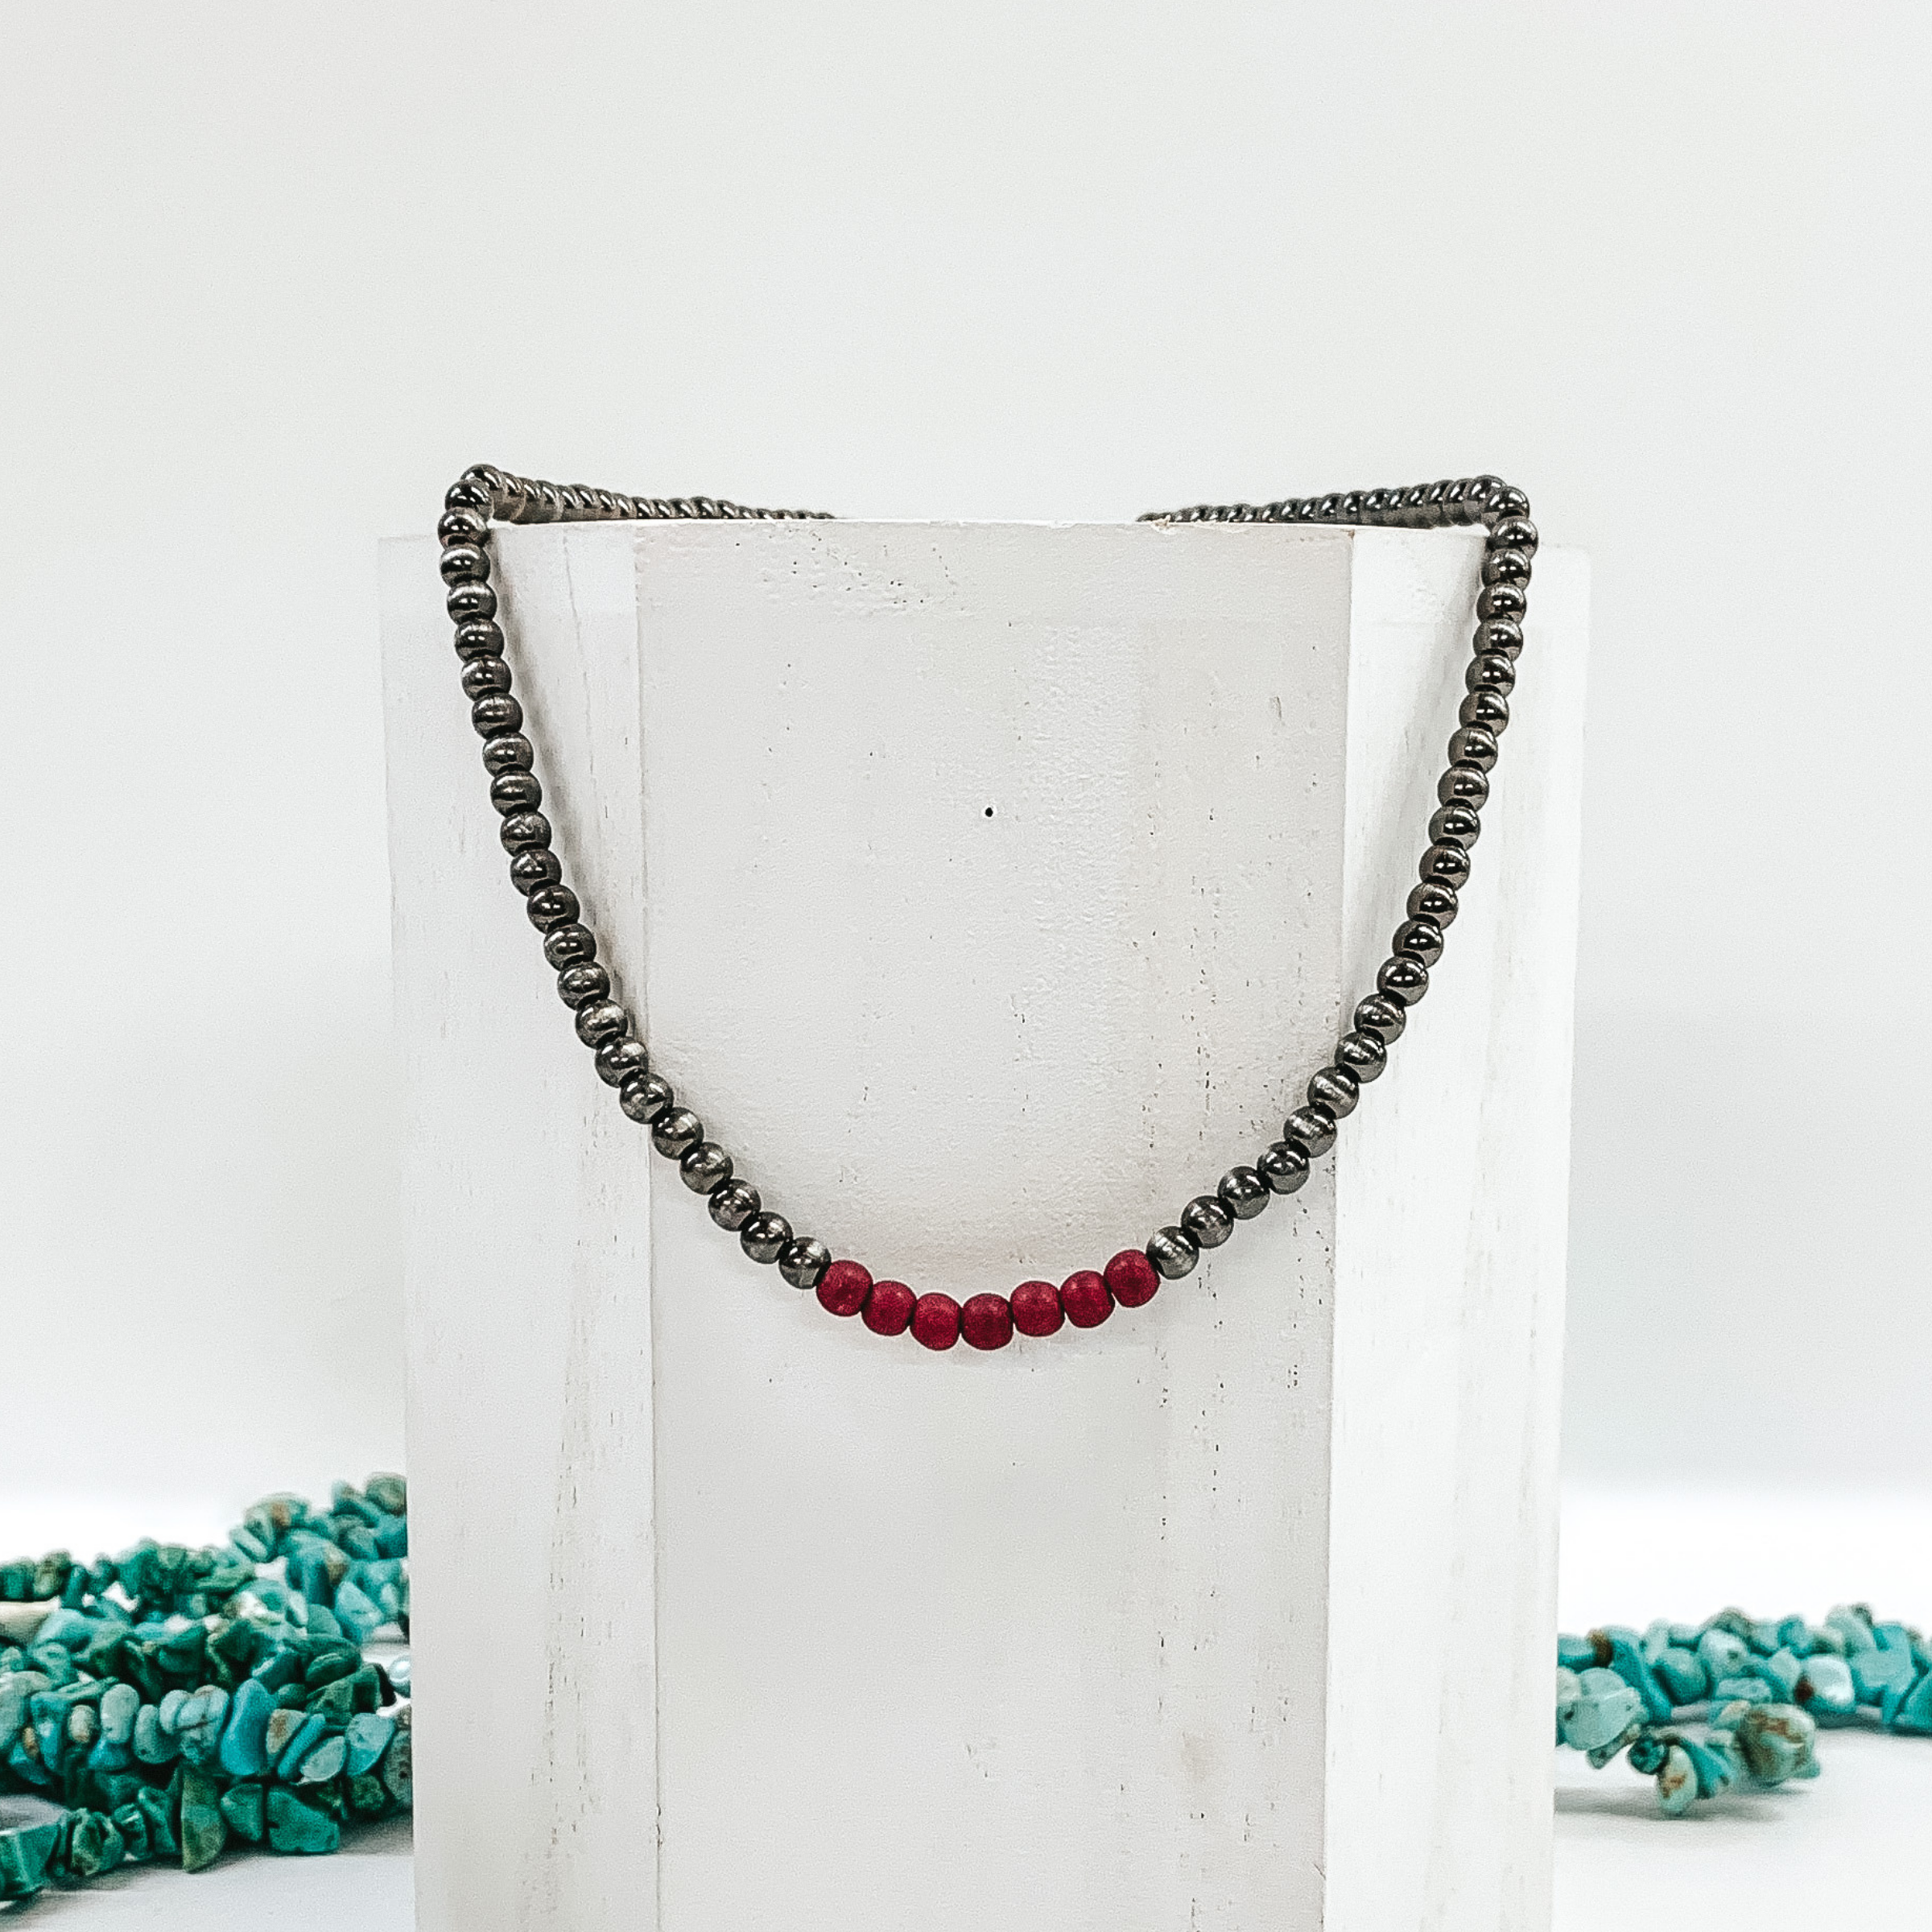 Small Navajo Inspired Beaded Necklace with Red Beads - Giddy Up Glamour Boutique